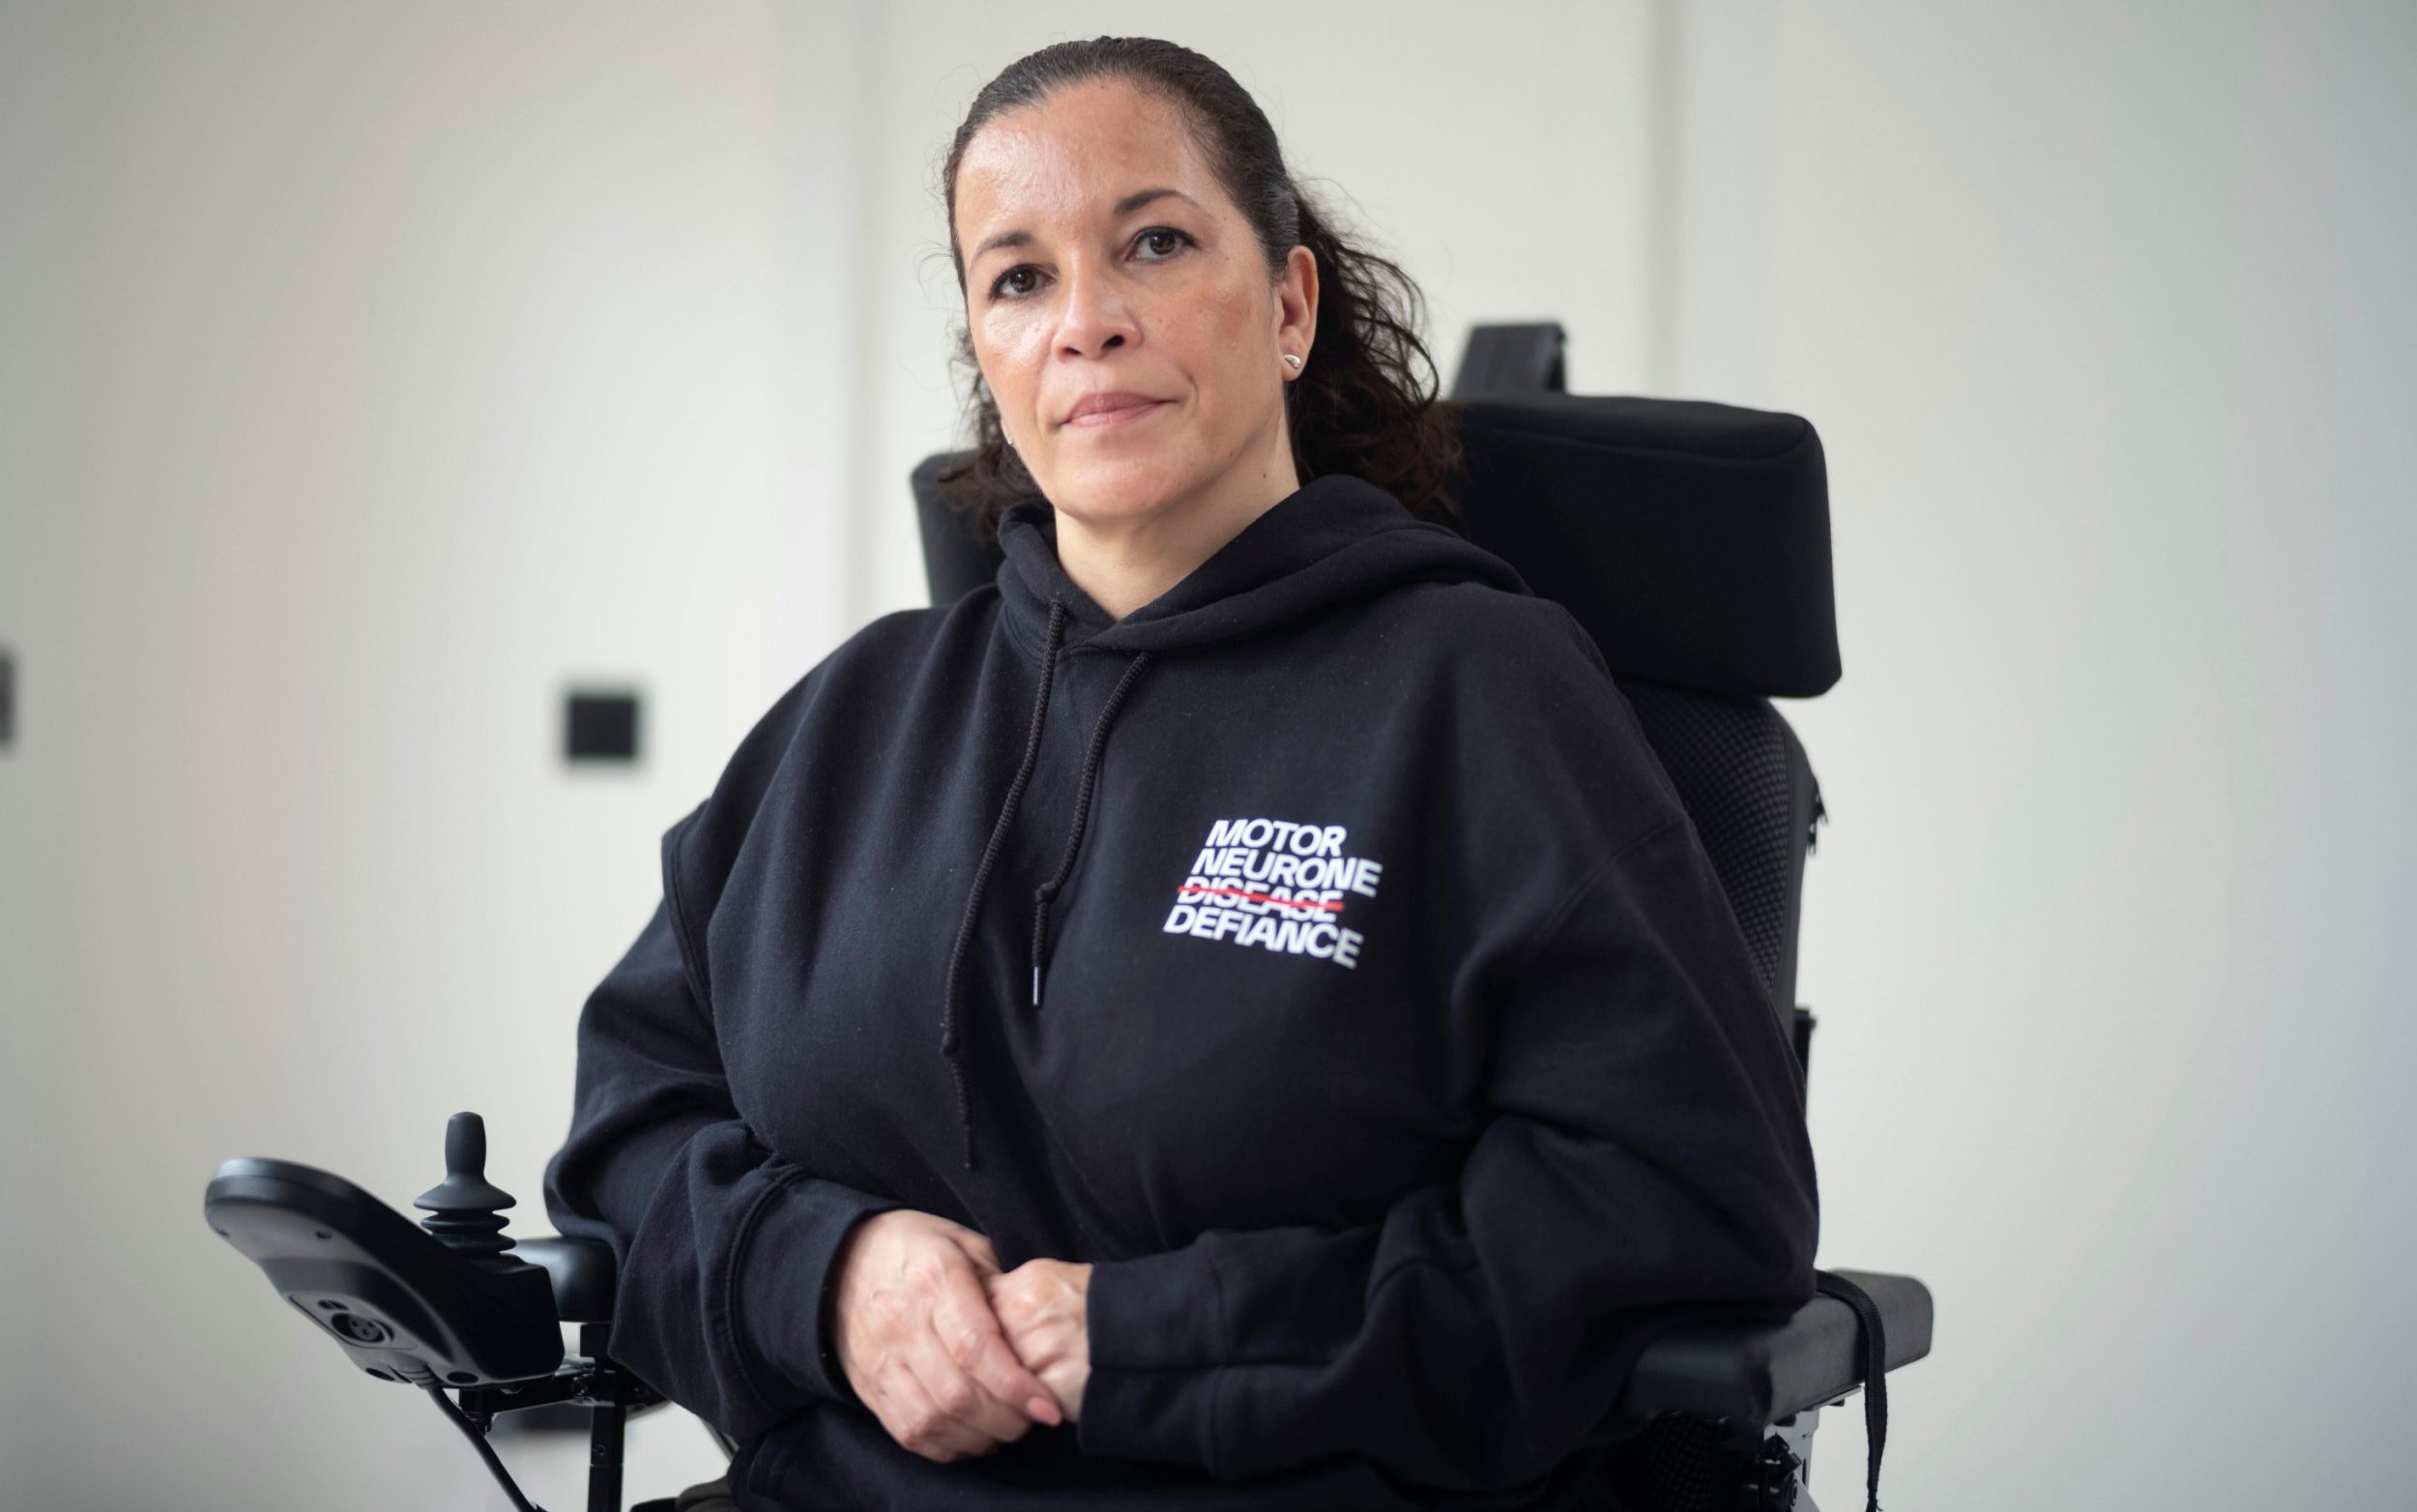 motor neurone disease destroyed my life – now the drug that gave me hope is being taken away